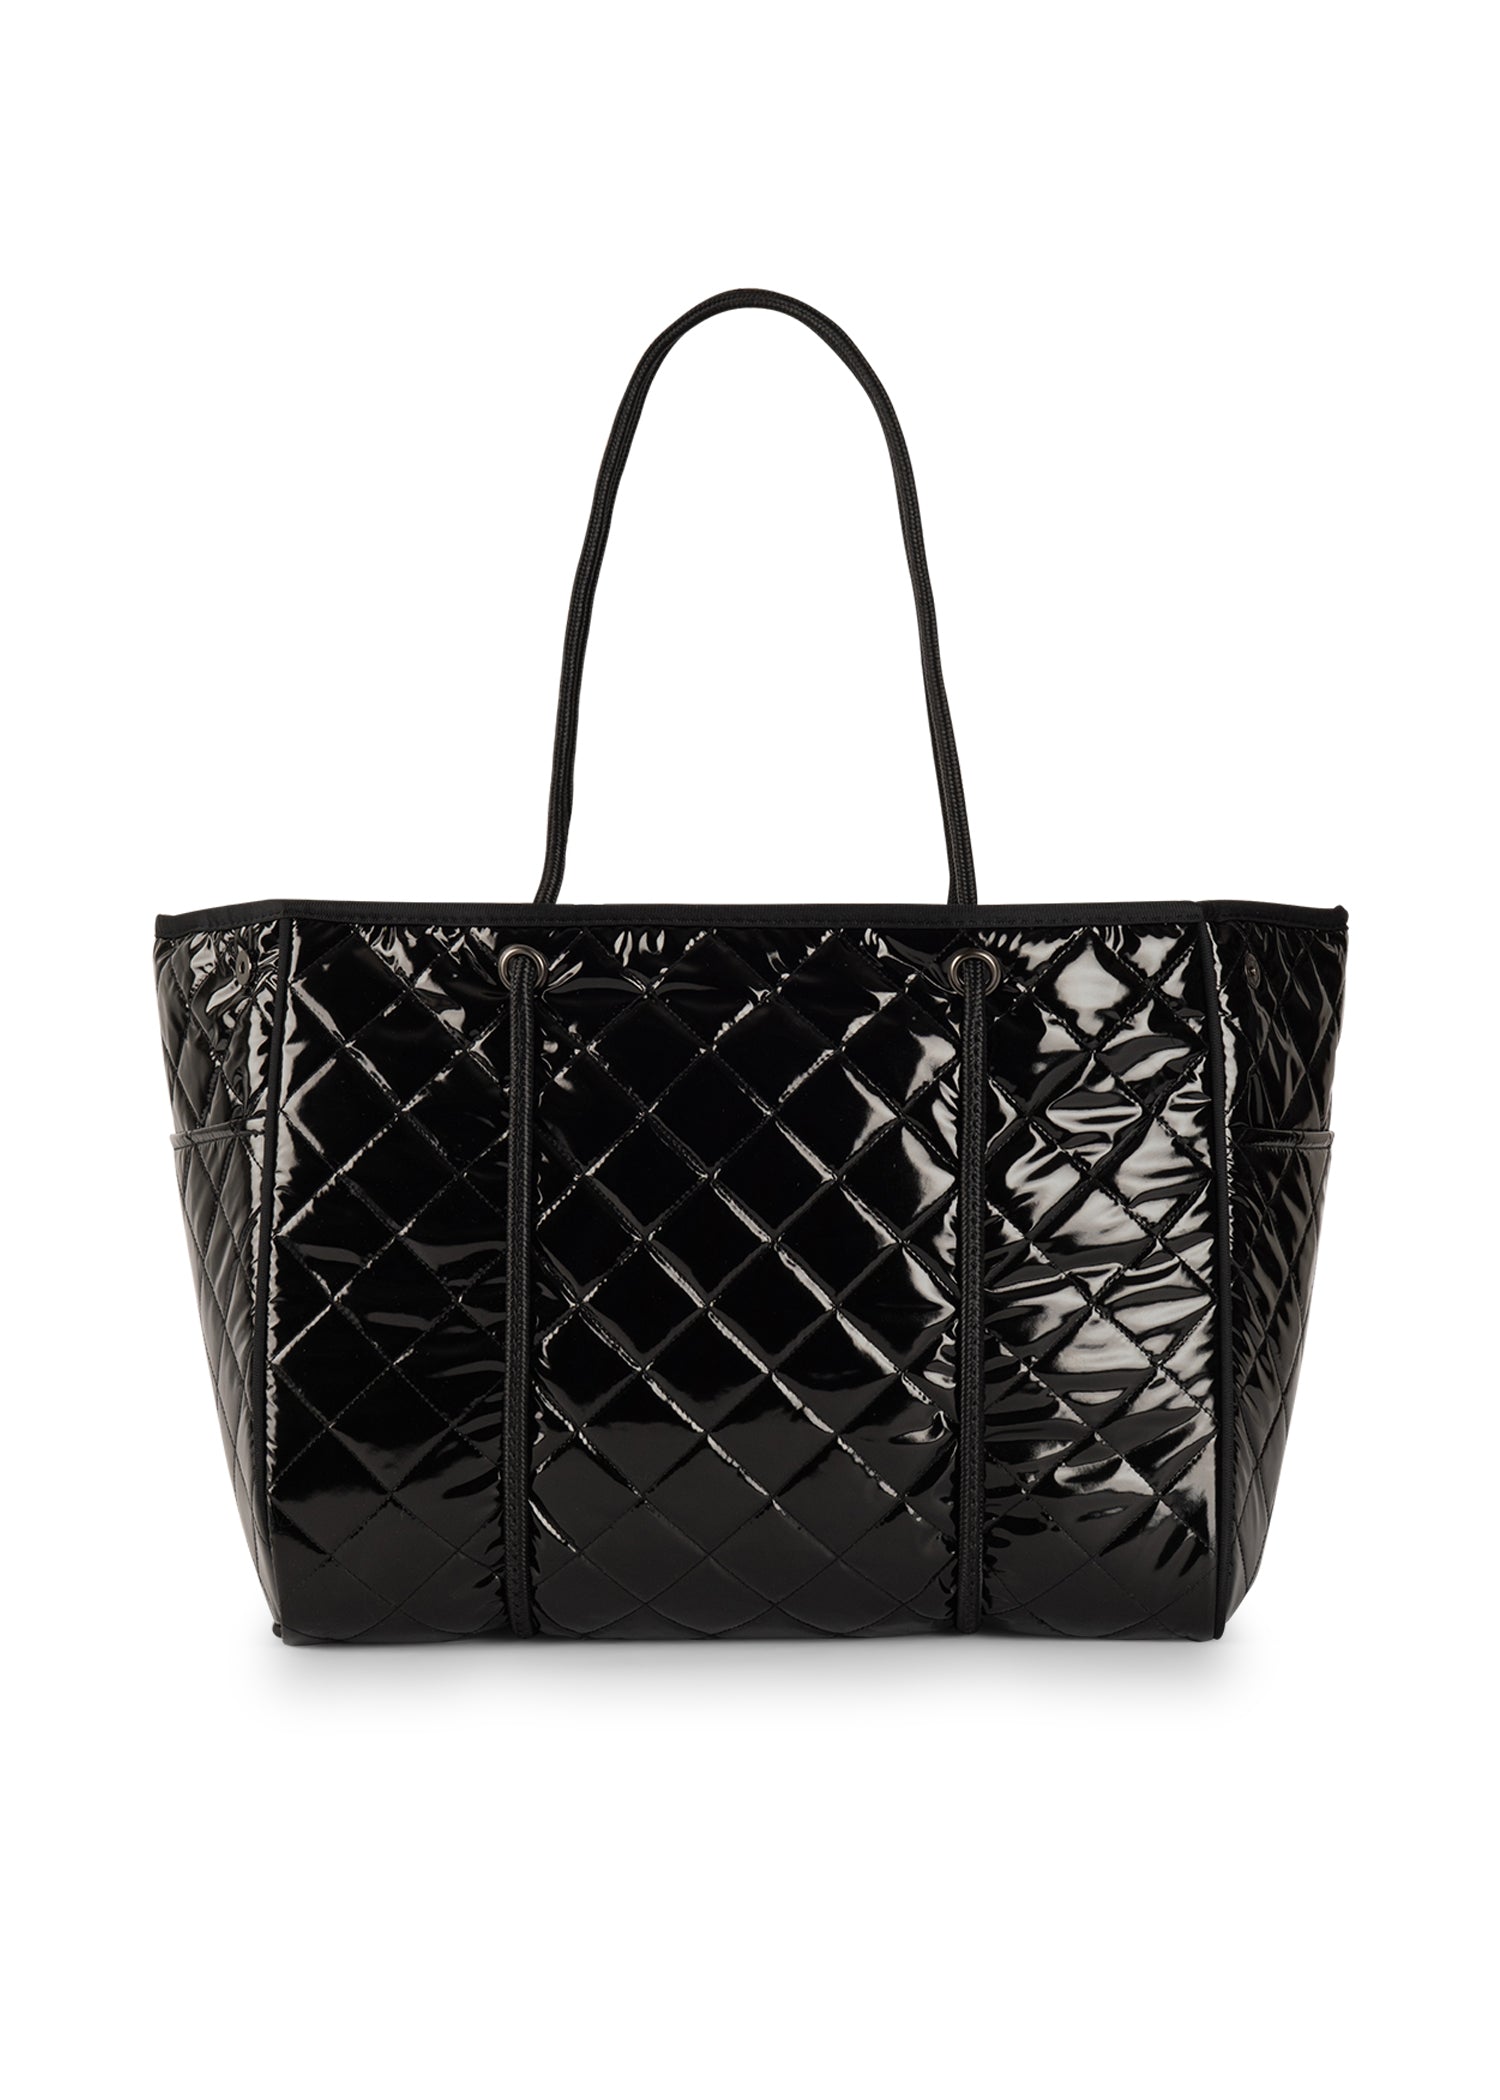 The Greyson Tote